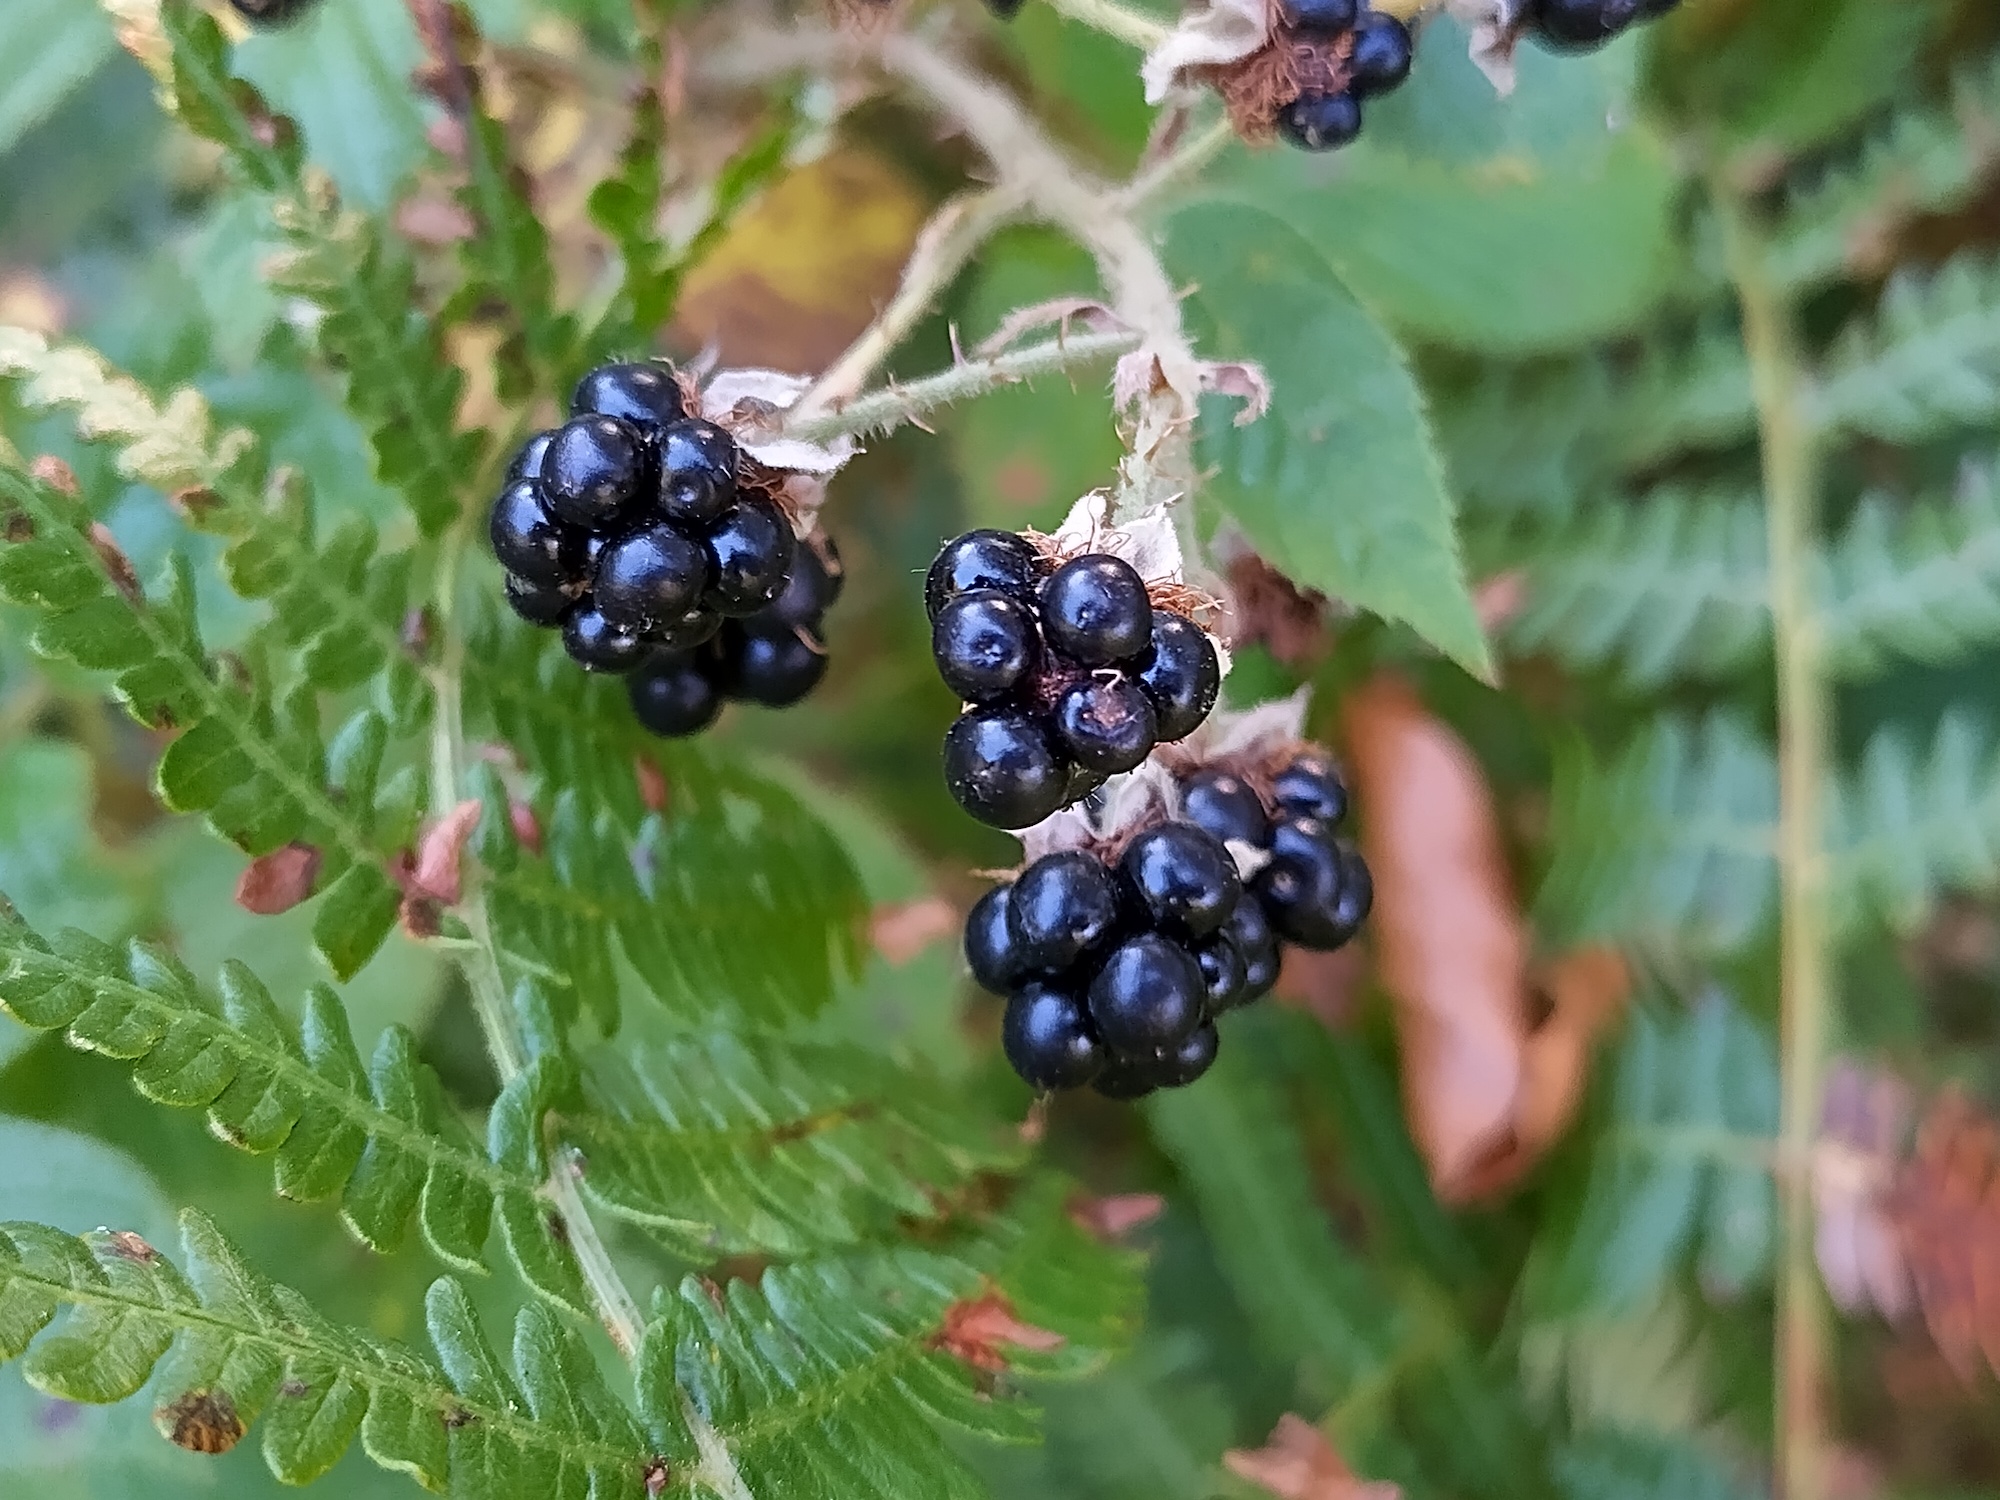 Photo of blackberries taken with the Nokia XR20.